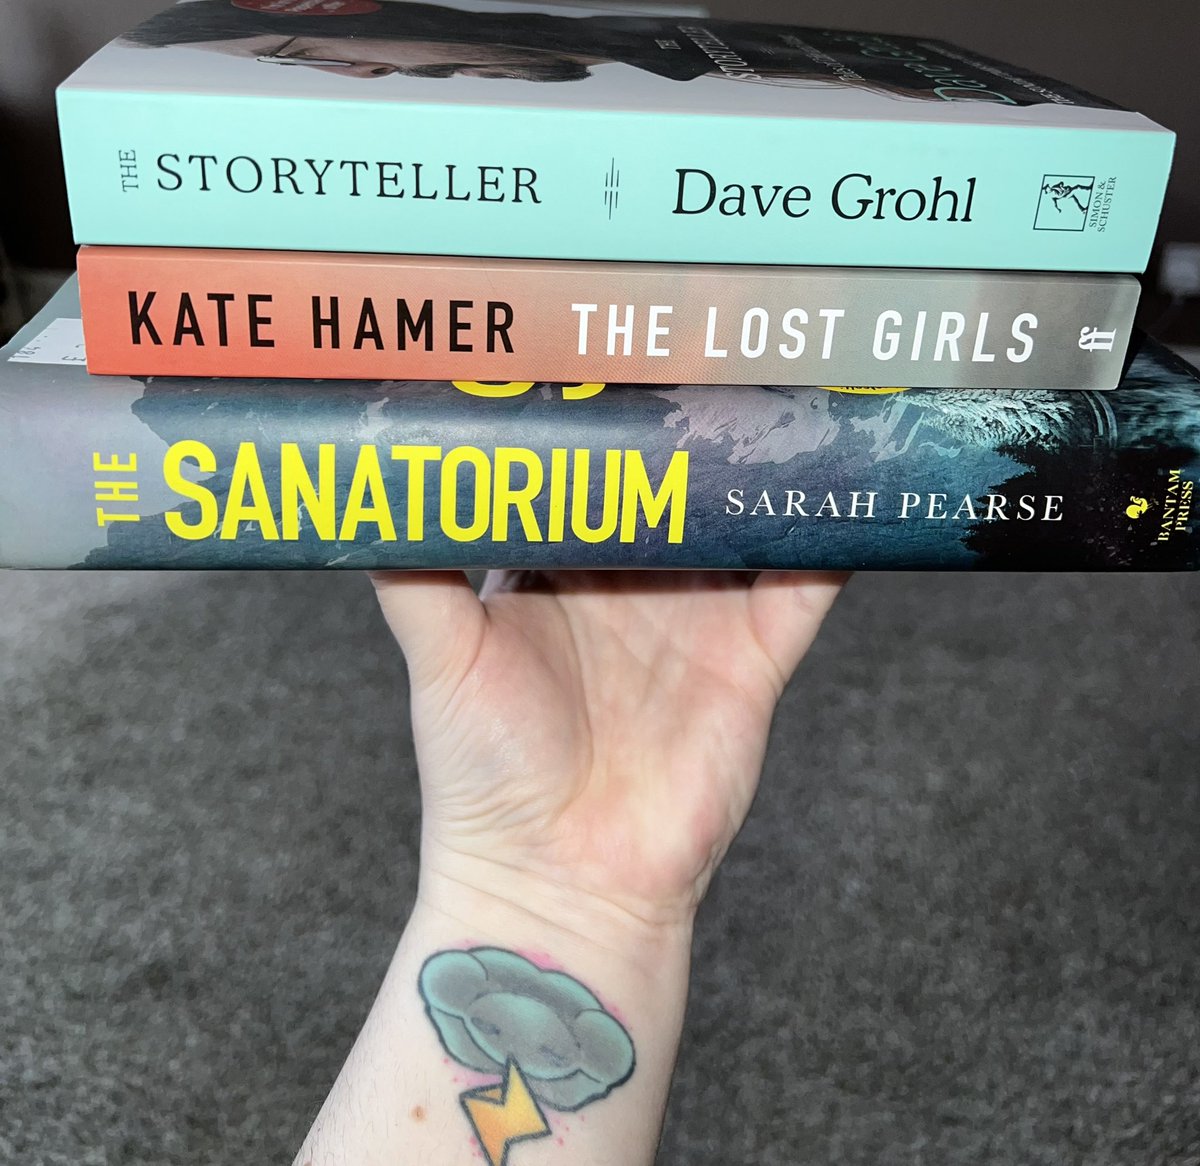 And it’s #BallsToTheBacklog!  Never gonna BEAT the backlog if I keep buying more books!  The Sanatorium was a charity shop mega-bargain 😀  

(picture apparently also stars one of my Super Mario themed tattoos … I can’t be bothered cropping 🤷‍♀️)

#BookTwitter